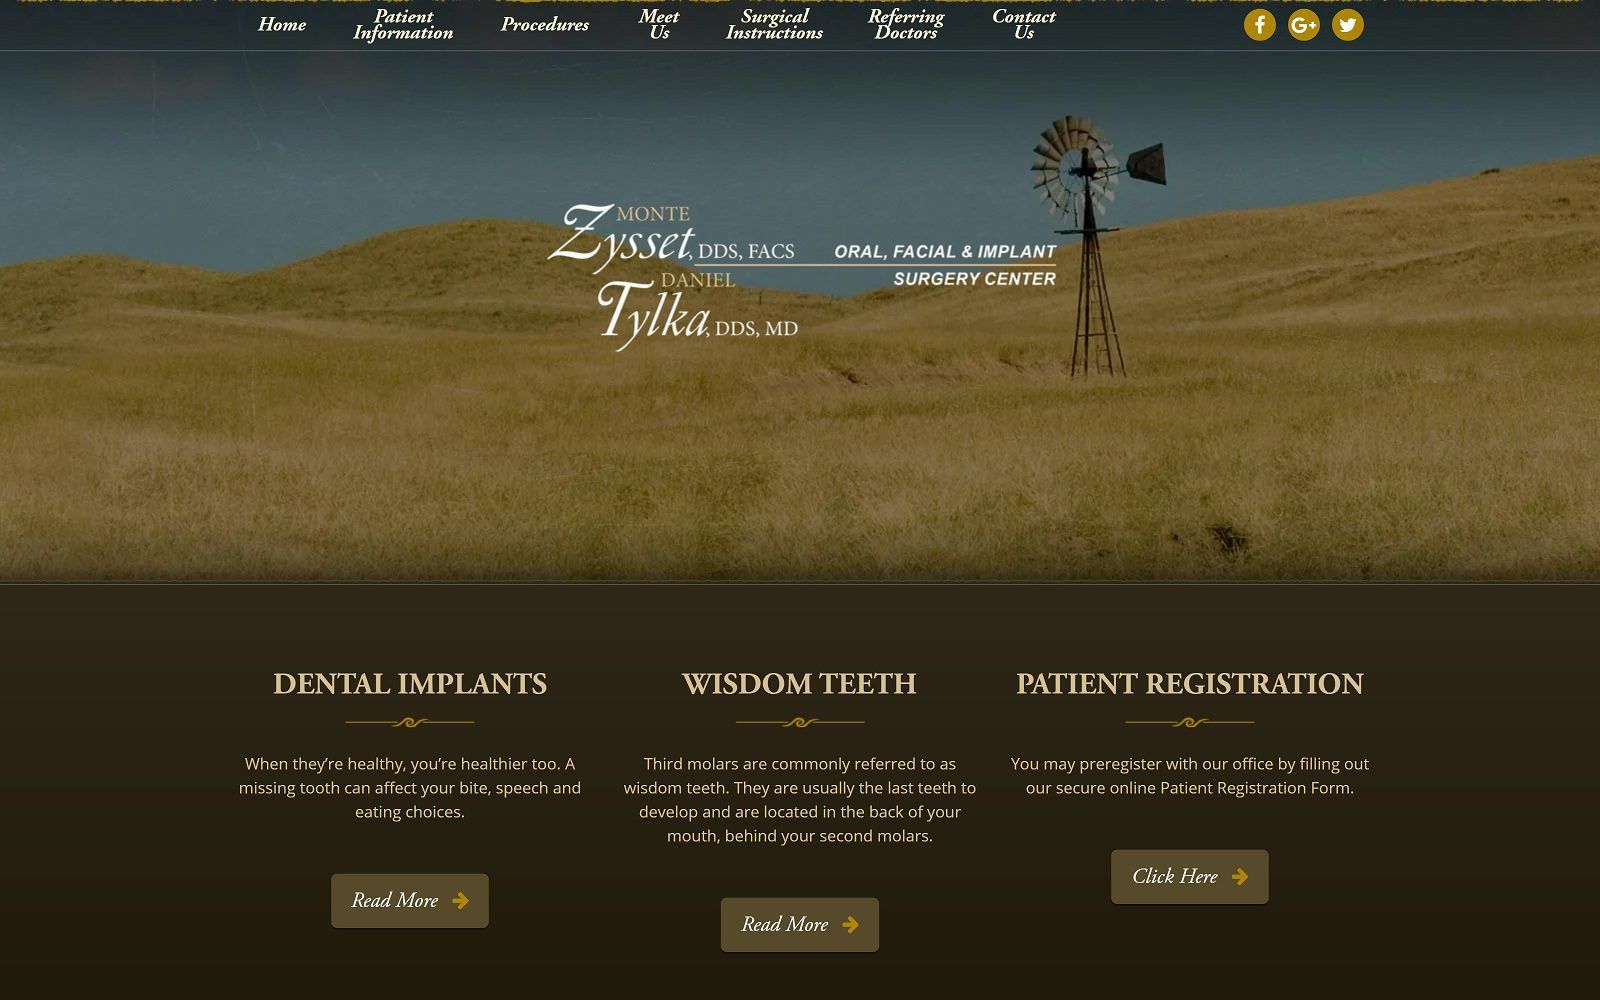 The screenshot of monte k. Zysset and dr. Daniel j. Tylka, oral, facial, and implant surgery center website